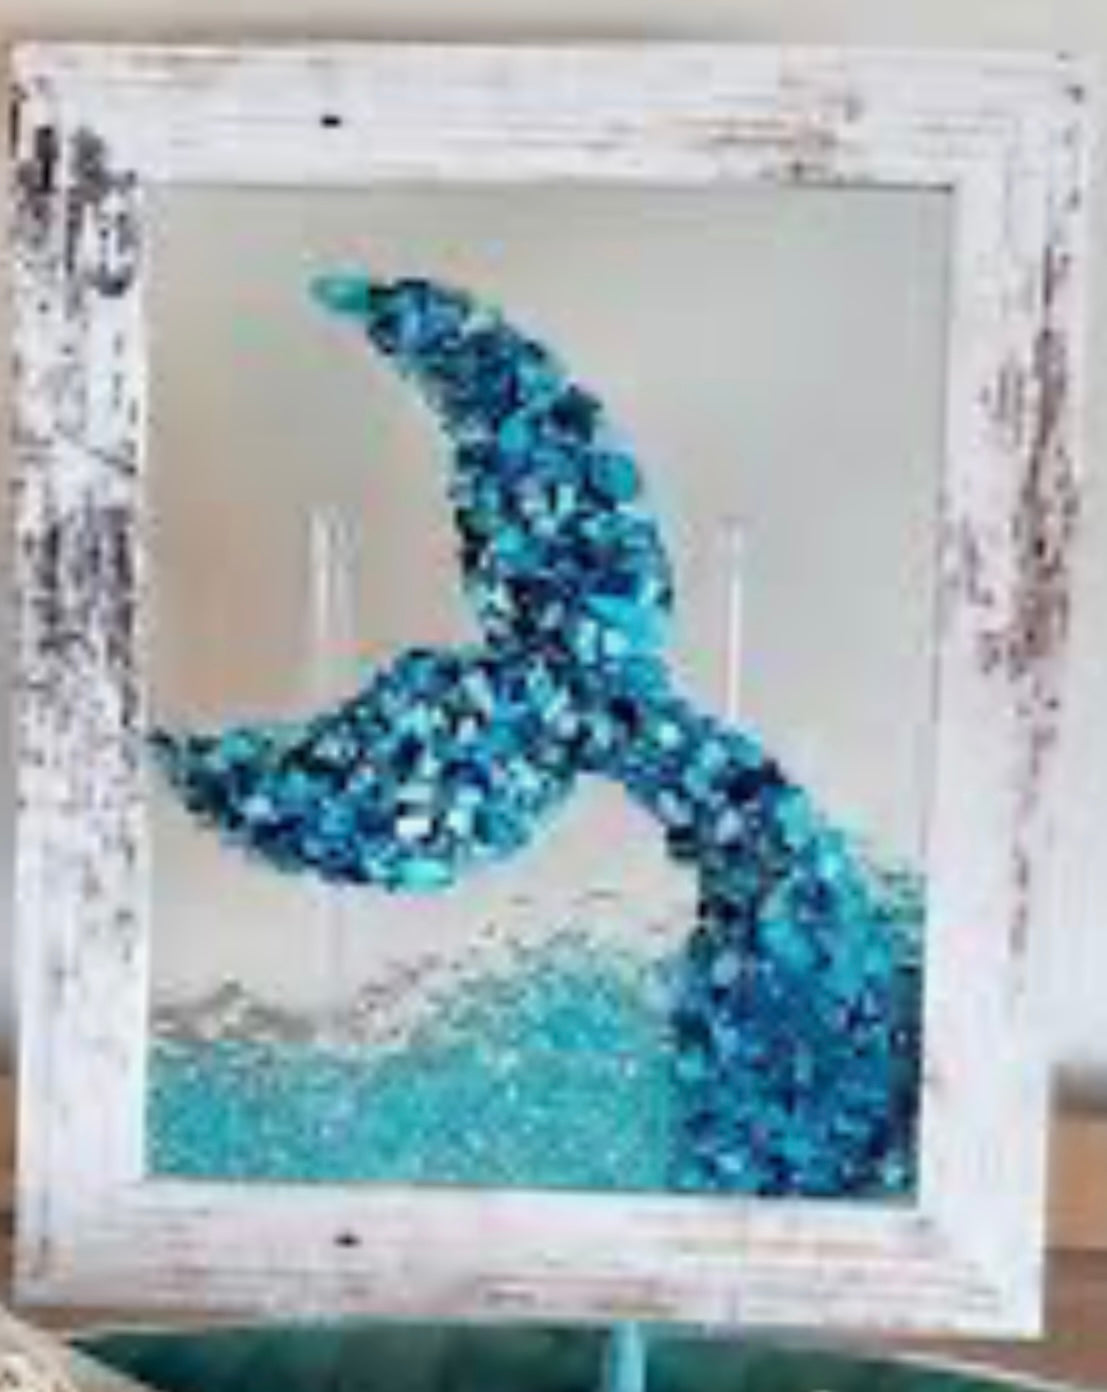 ***Friday March 22 class 6:00** Deposit for  Resin and Glass class (remainder due at the class)